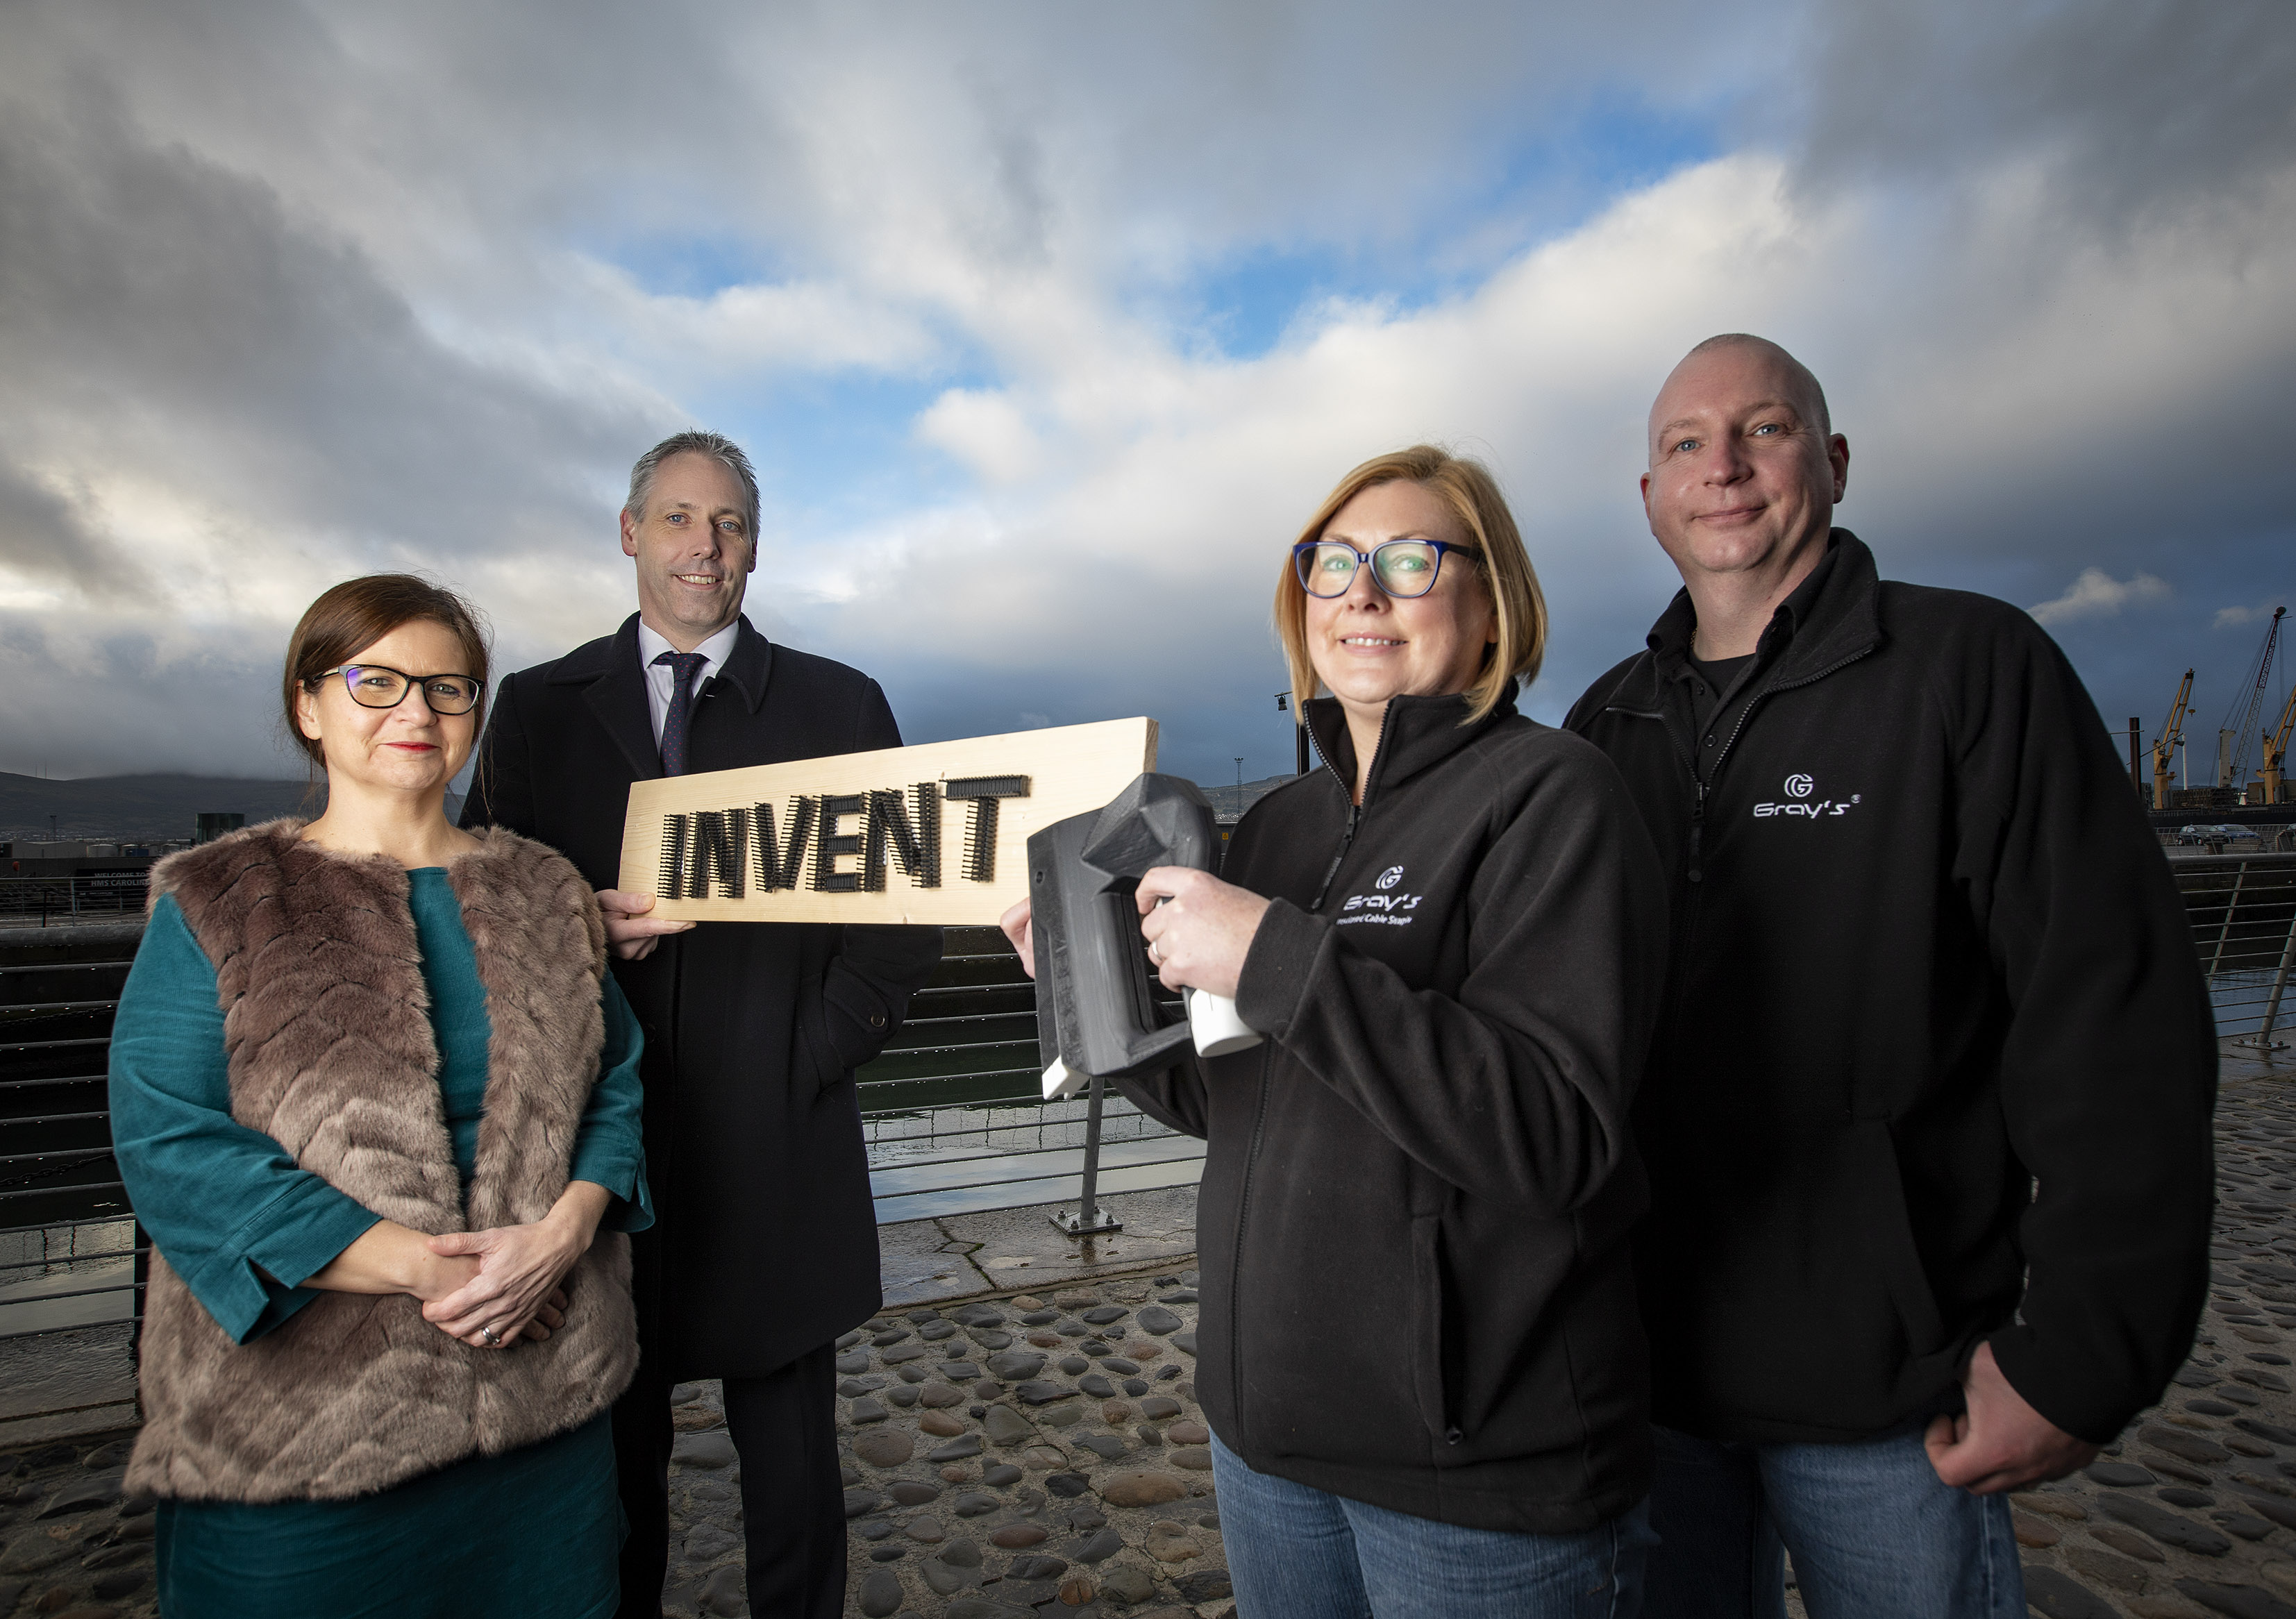 Catalyst Inc launches Invent competition